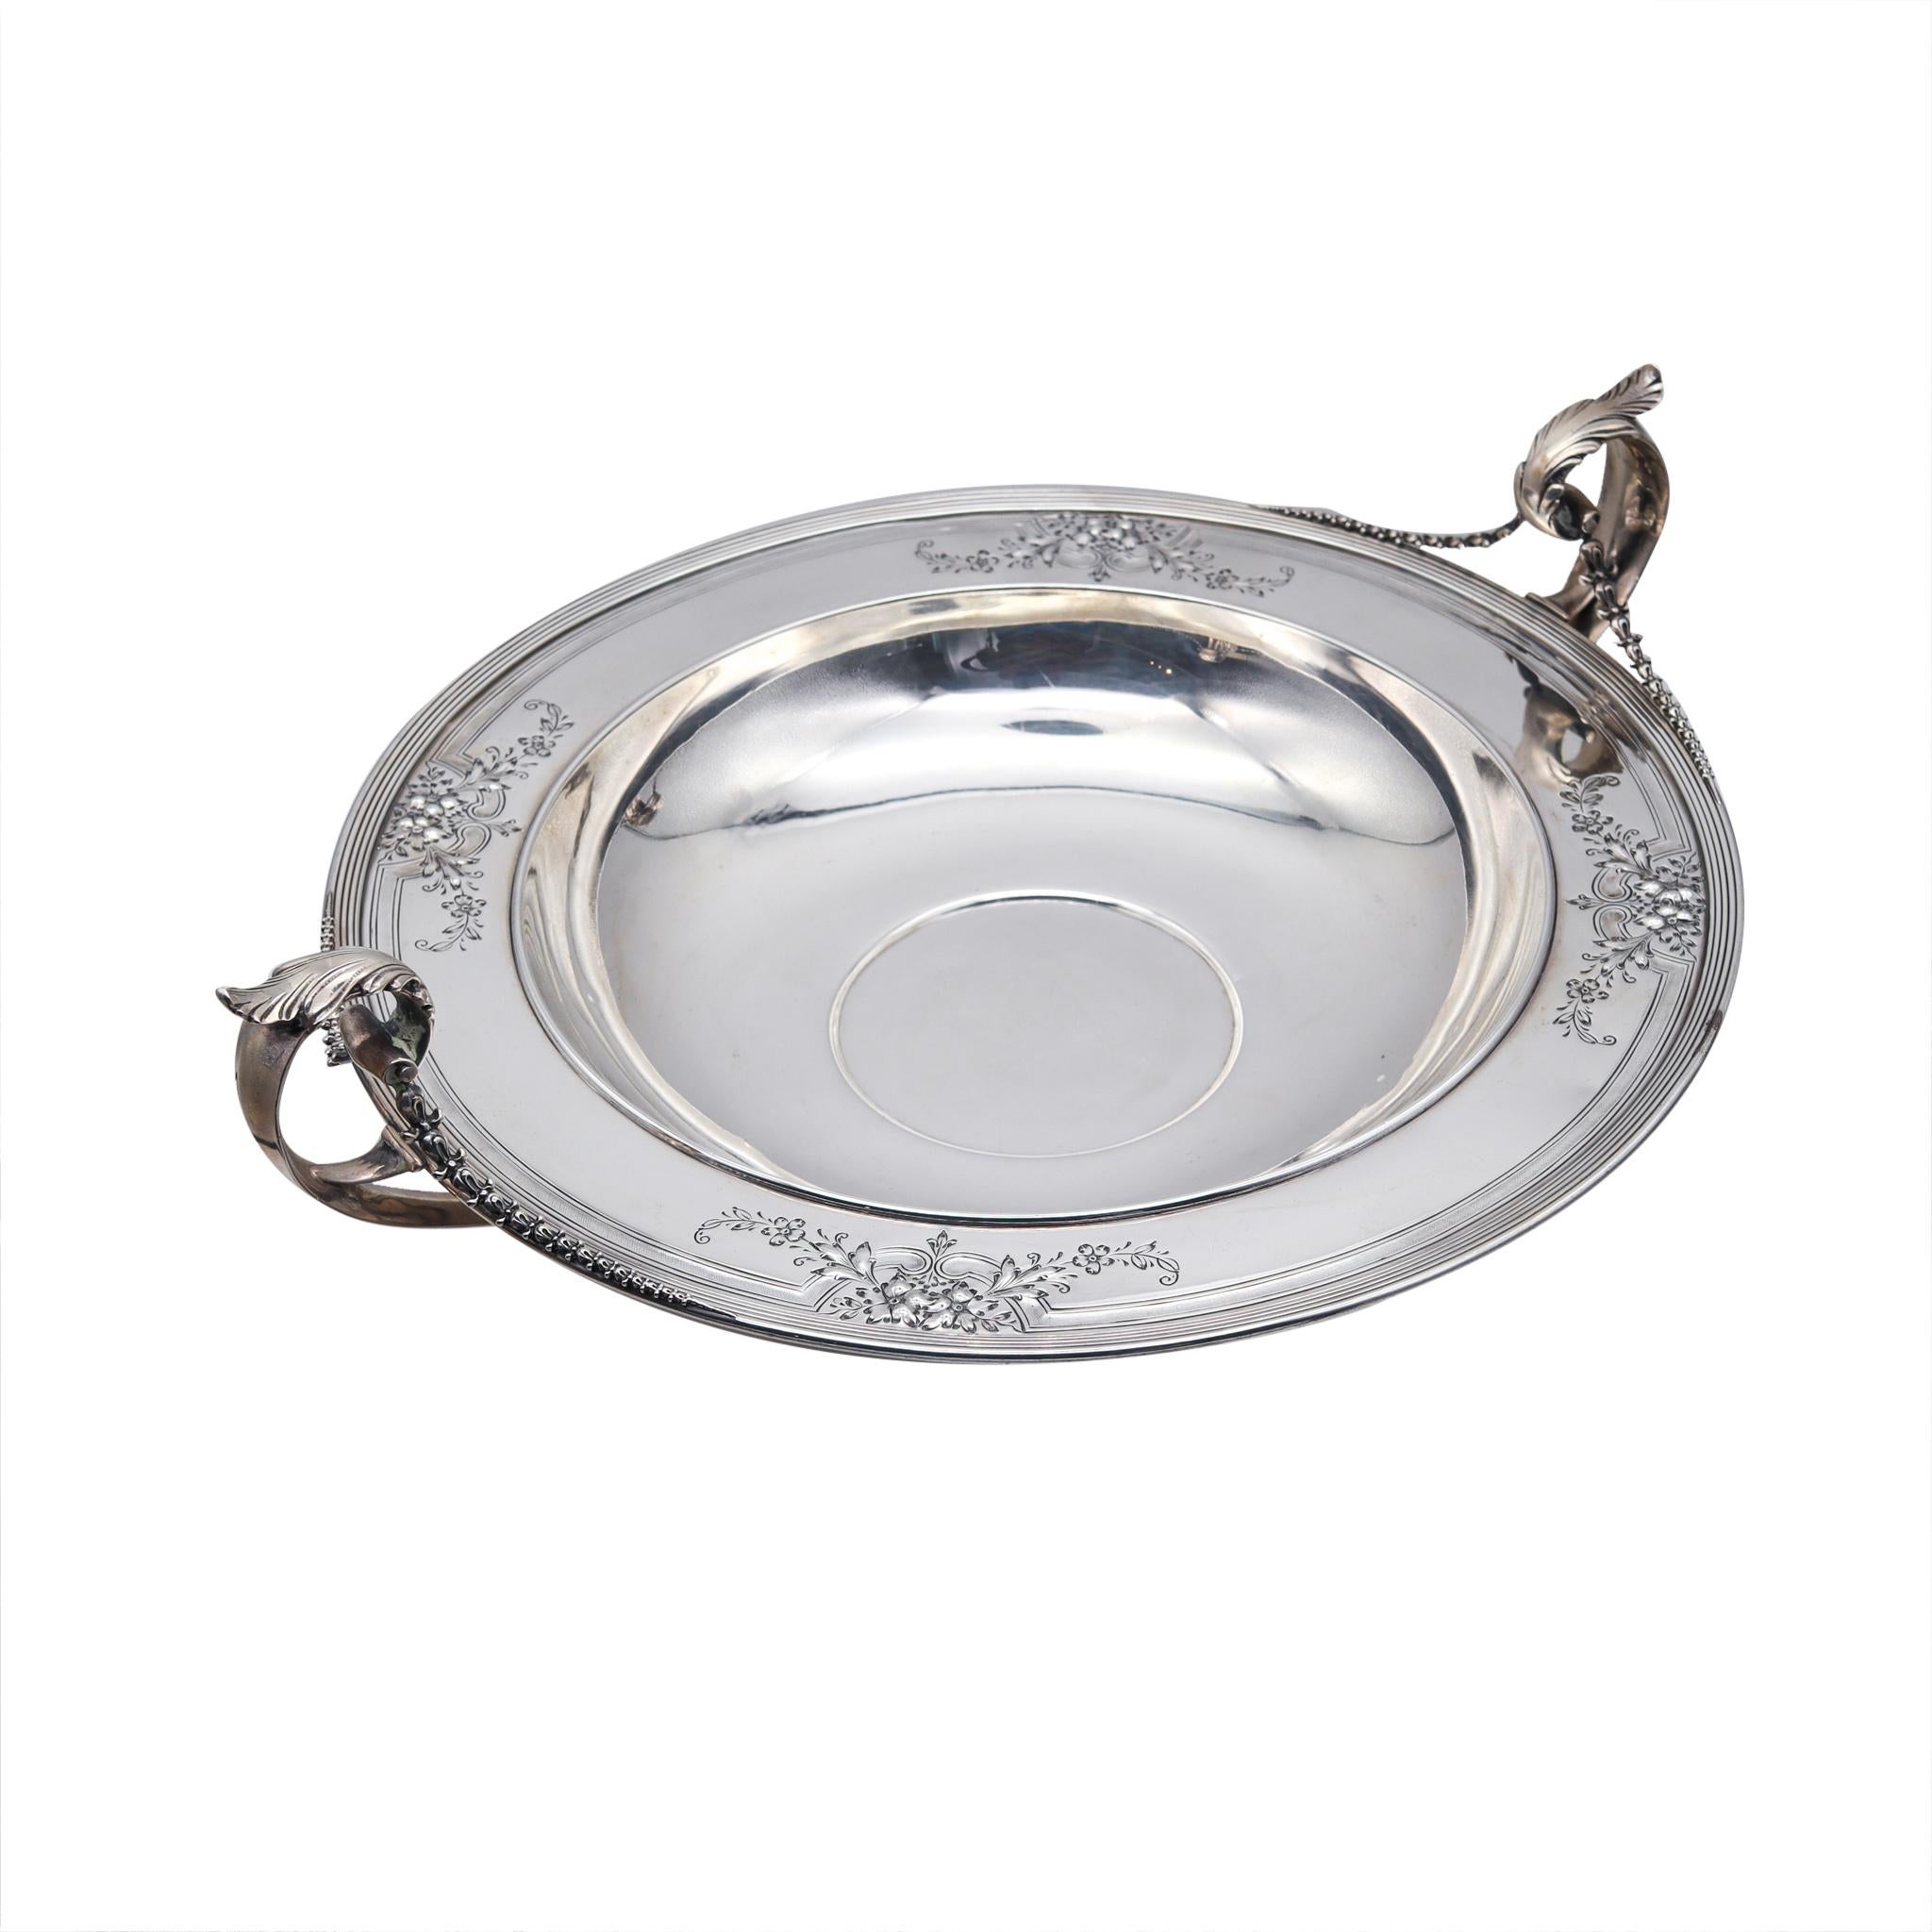 William B. Durgin Co. 1900 Edwardian Neo Classic Center Bowl 925 Sterling Silver For Sale 1